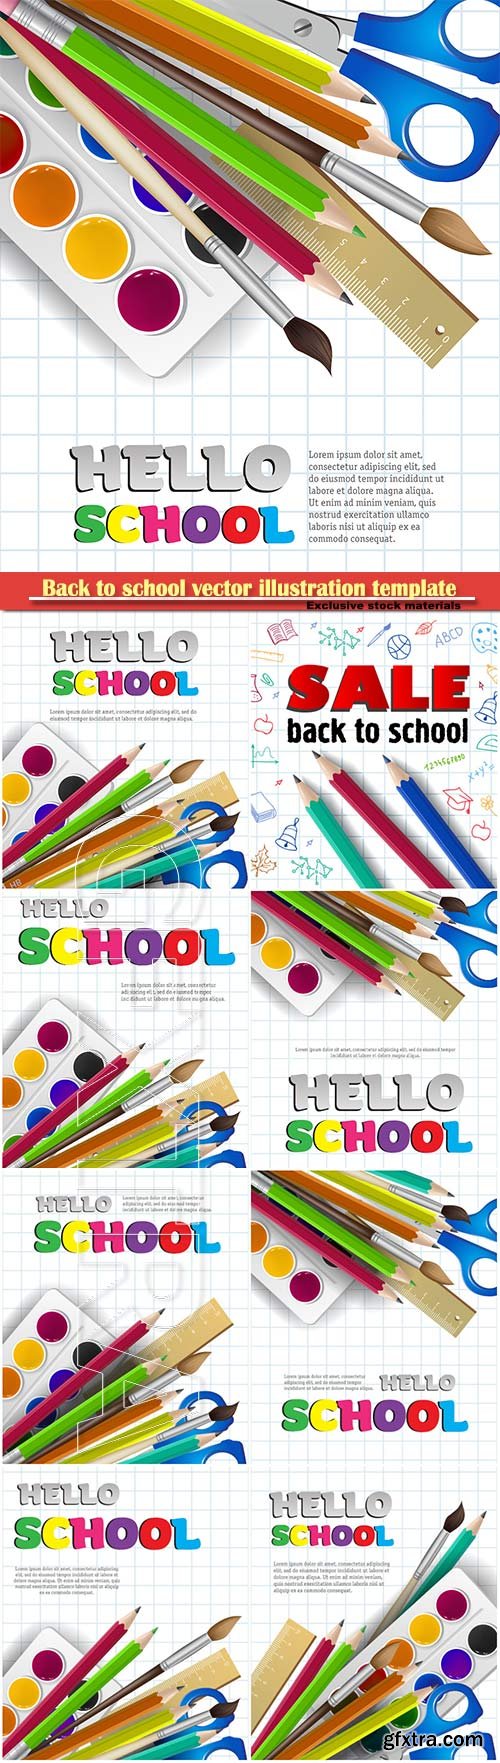 Back to school vector illustration template # 7